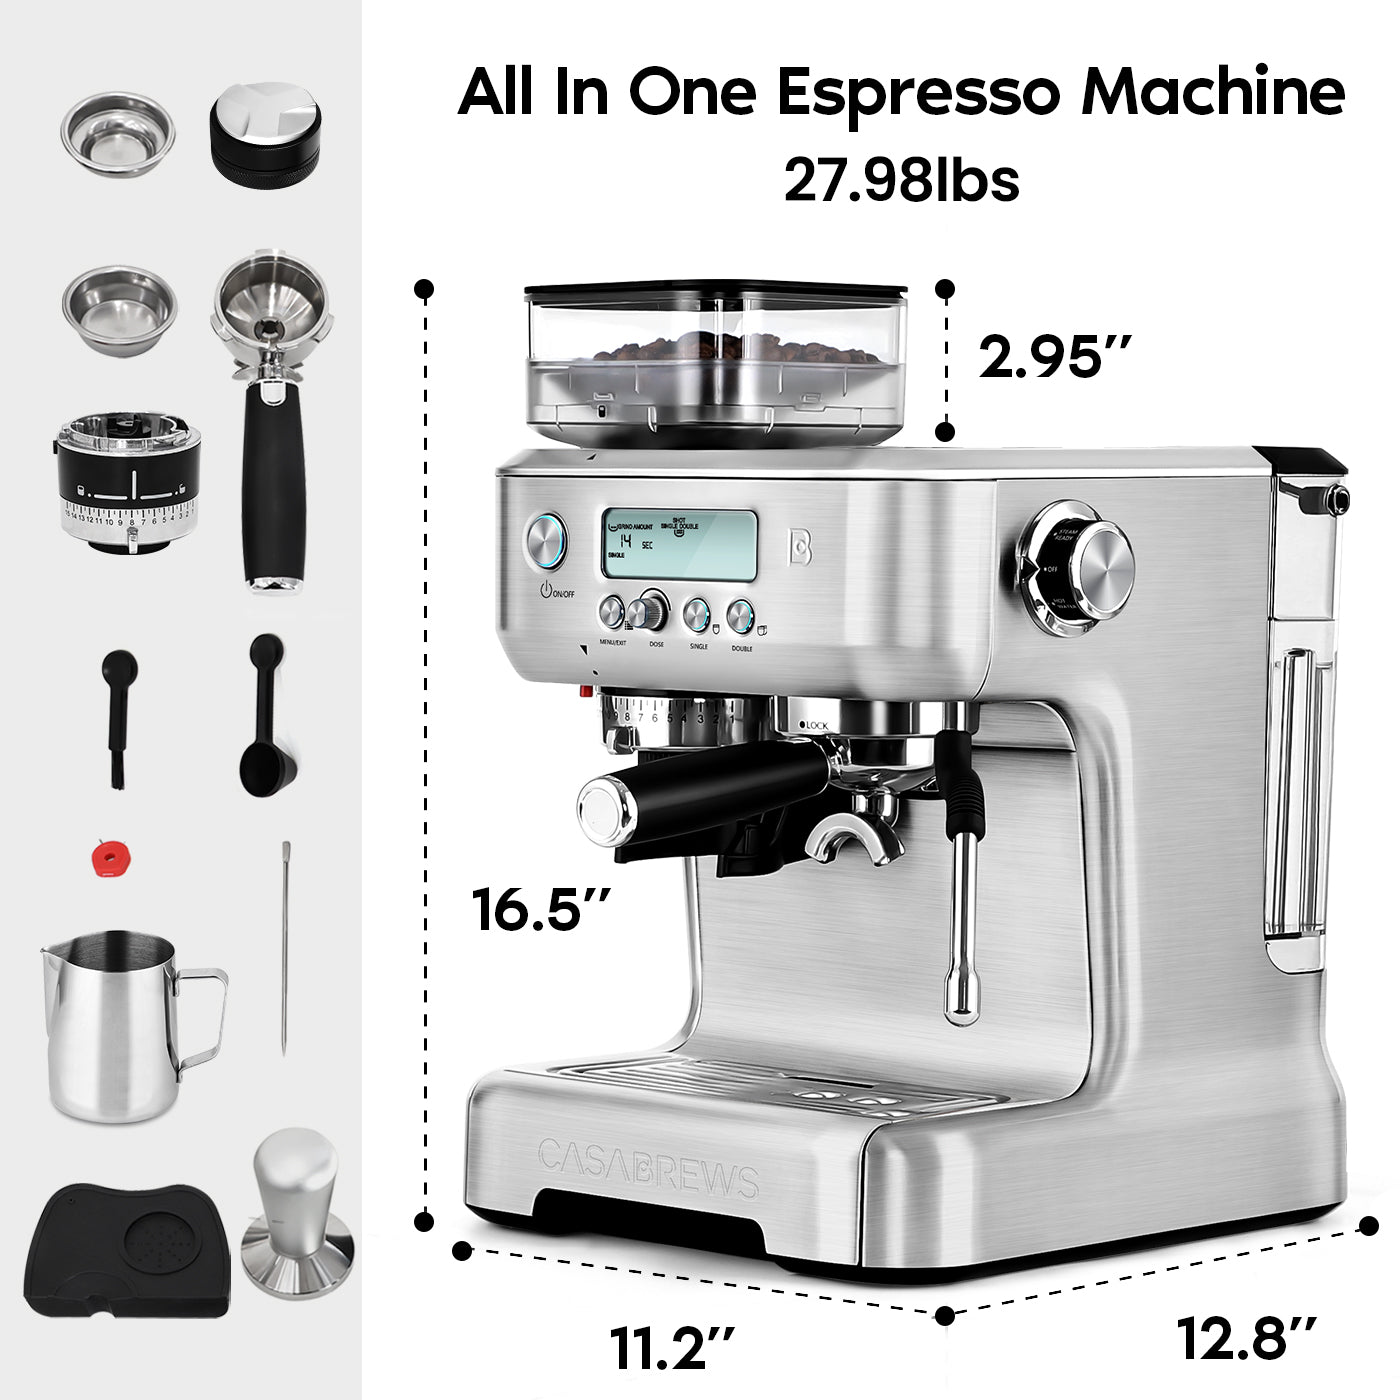 Casabrews 5700PRO™ All-in-One Espresso Machine with Digital LCD Display Screen